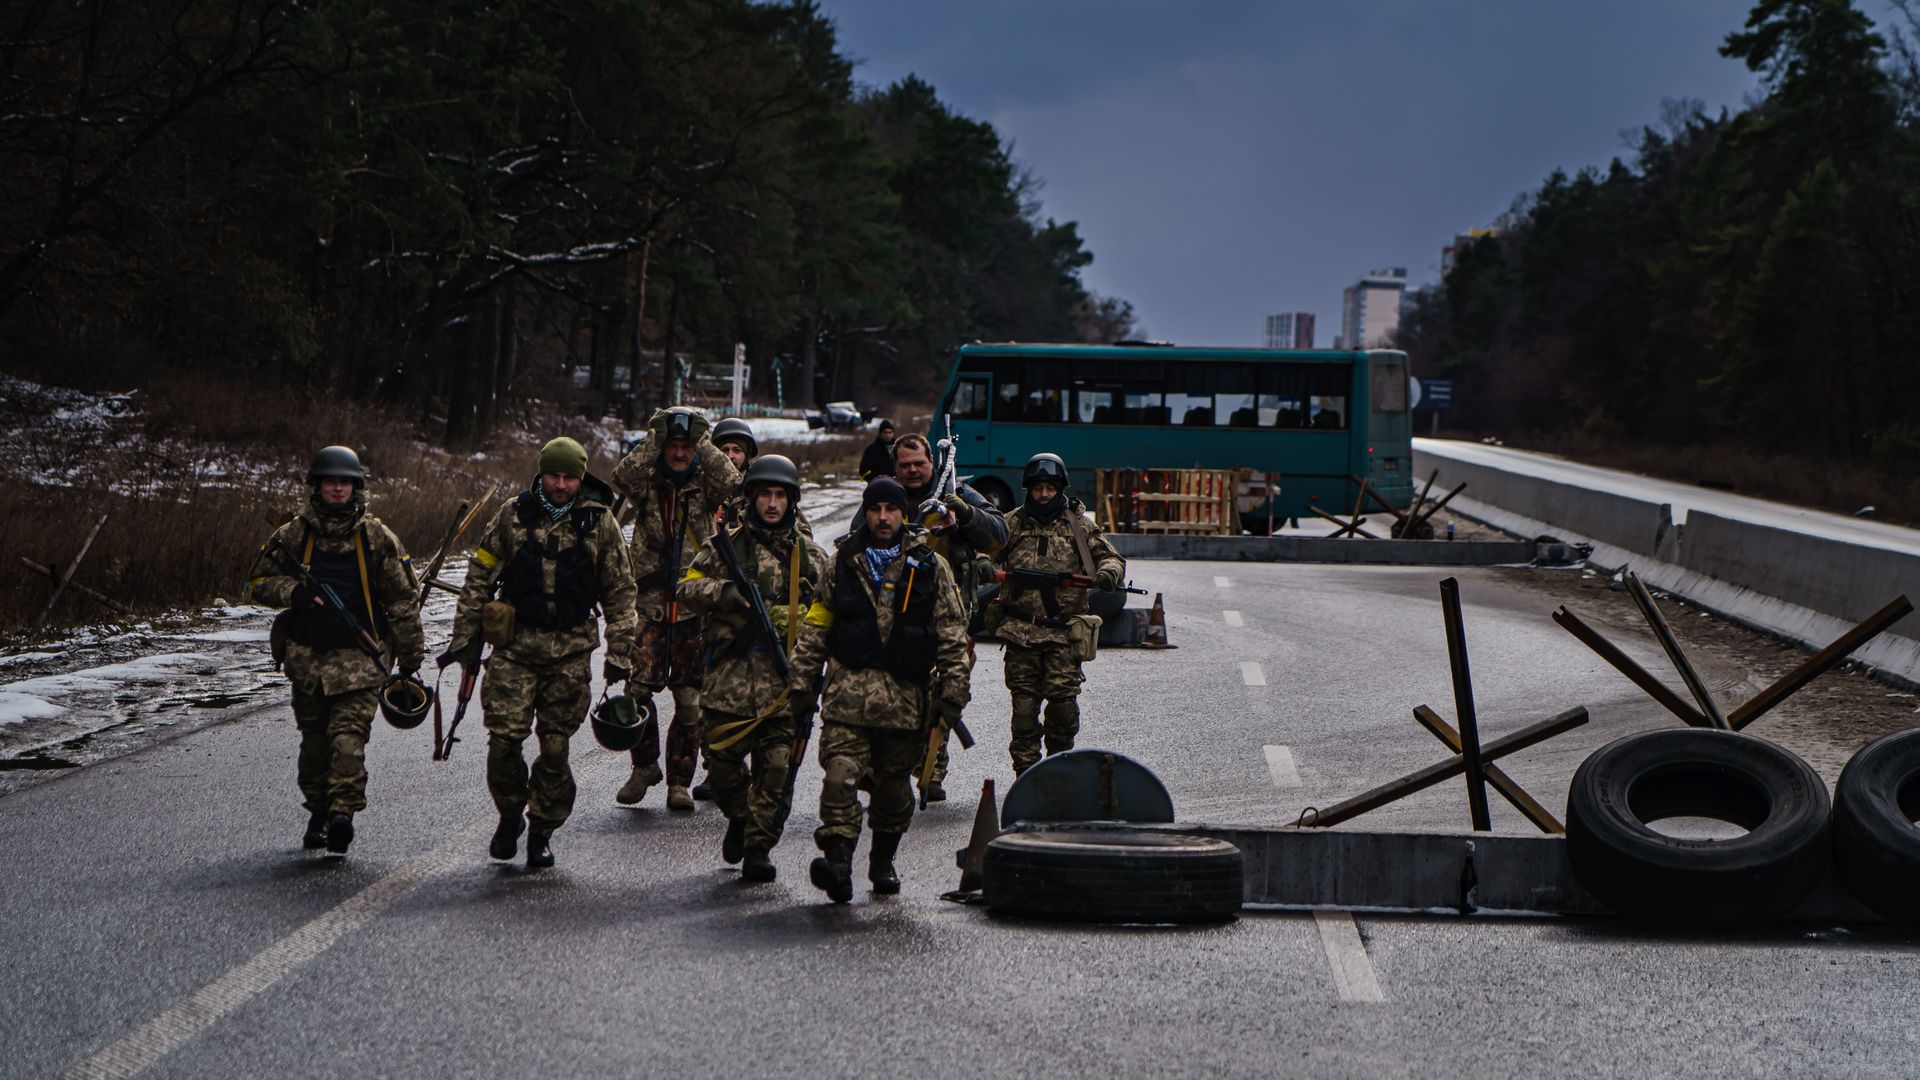 Soldiers arrive to reinforce one of the final checkpoints before the frontlines where Ukrainian forces are battling invading Russian forces near Brovary, Ukraine, Tuesday, March 8, 2022. 